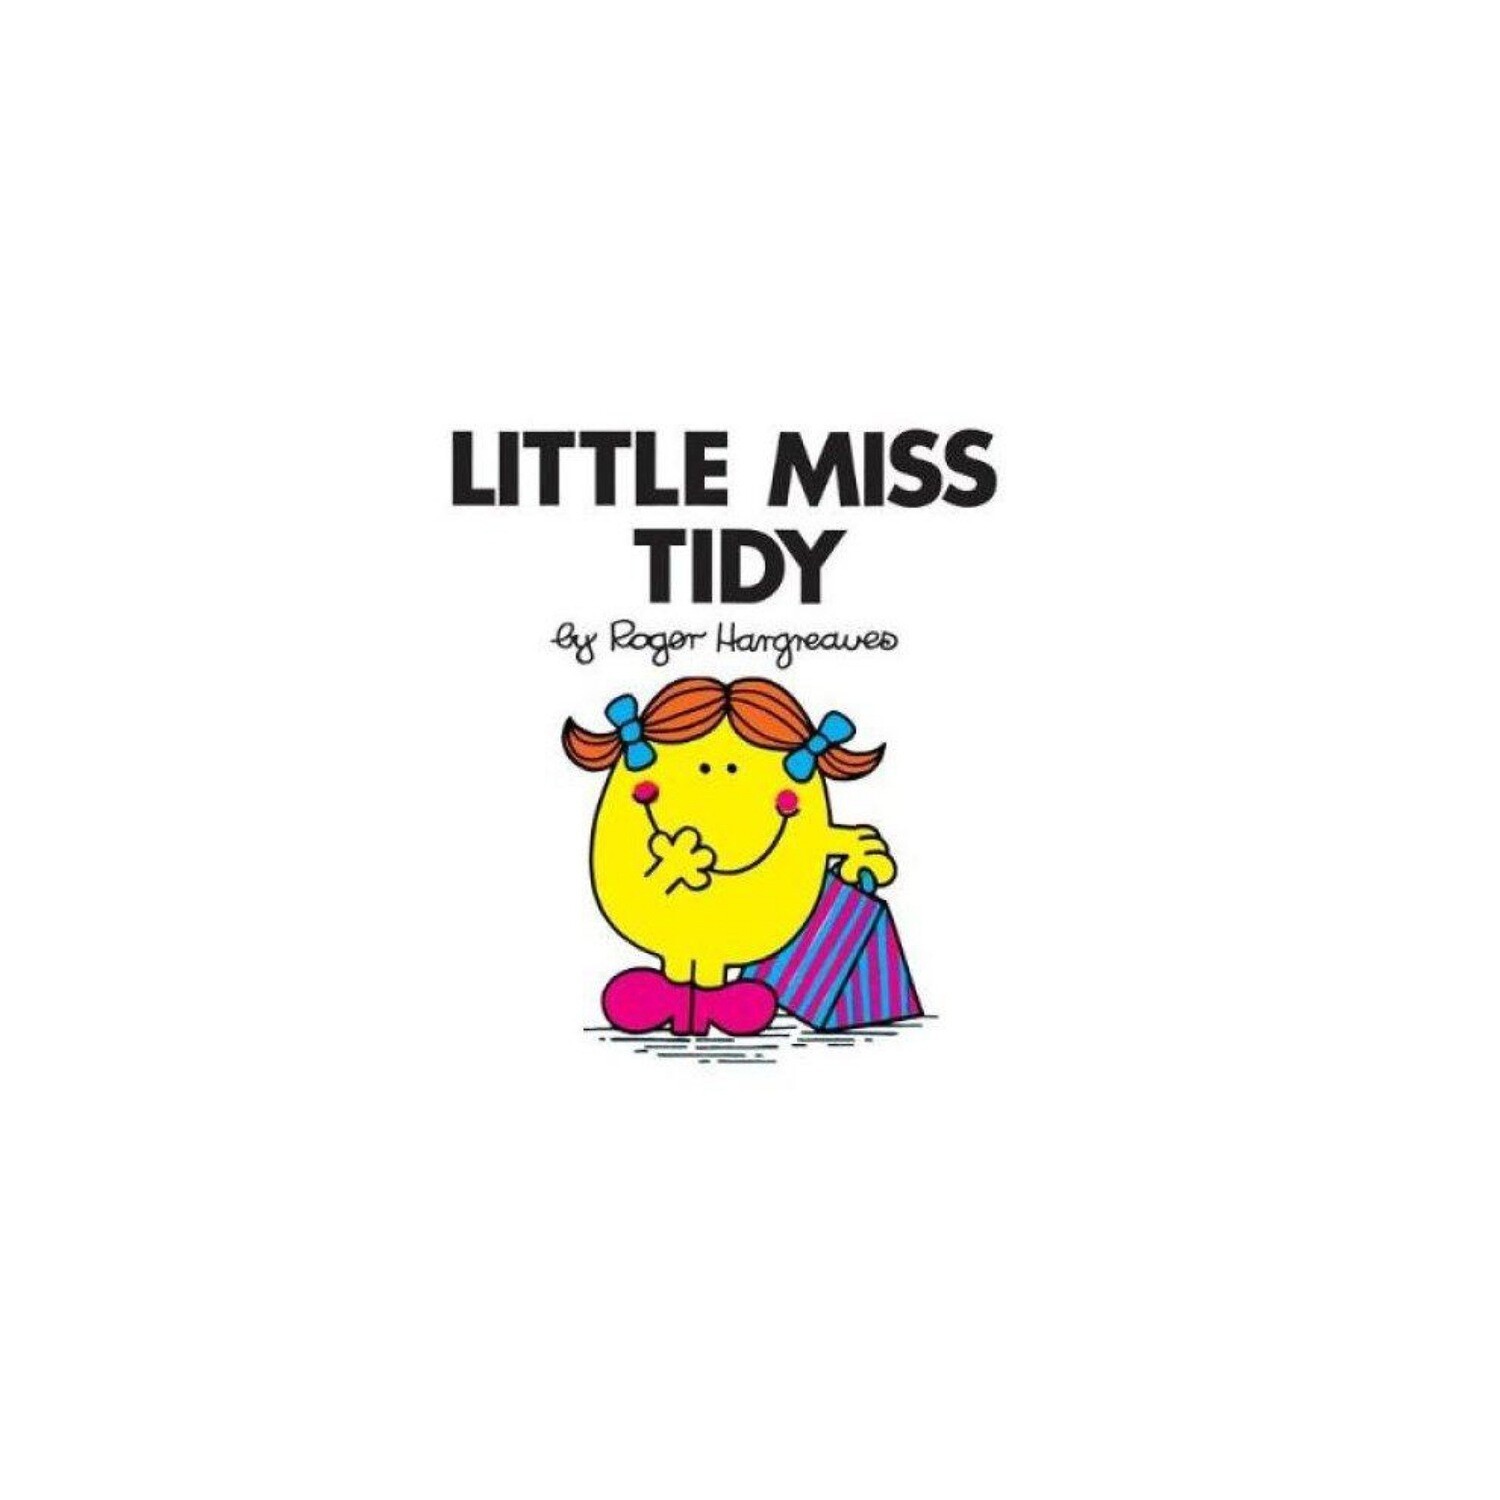 Little Miss Tidy (Little Miss Classic Library) by Roger Hargreaves